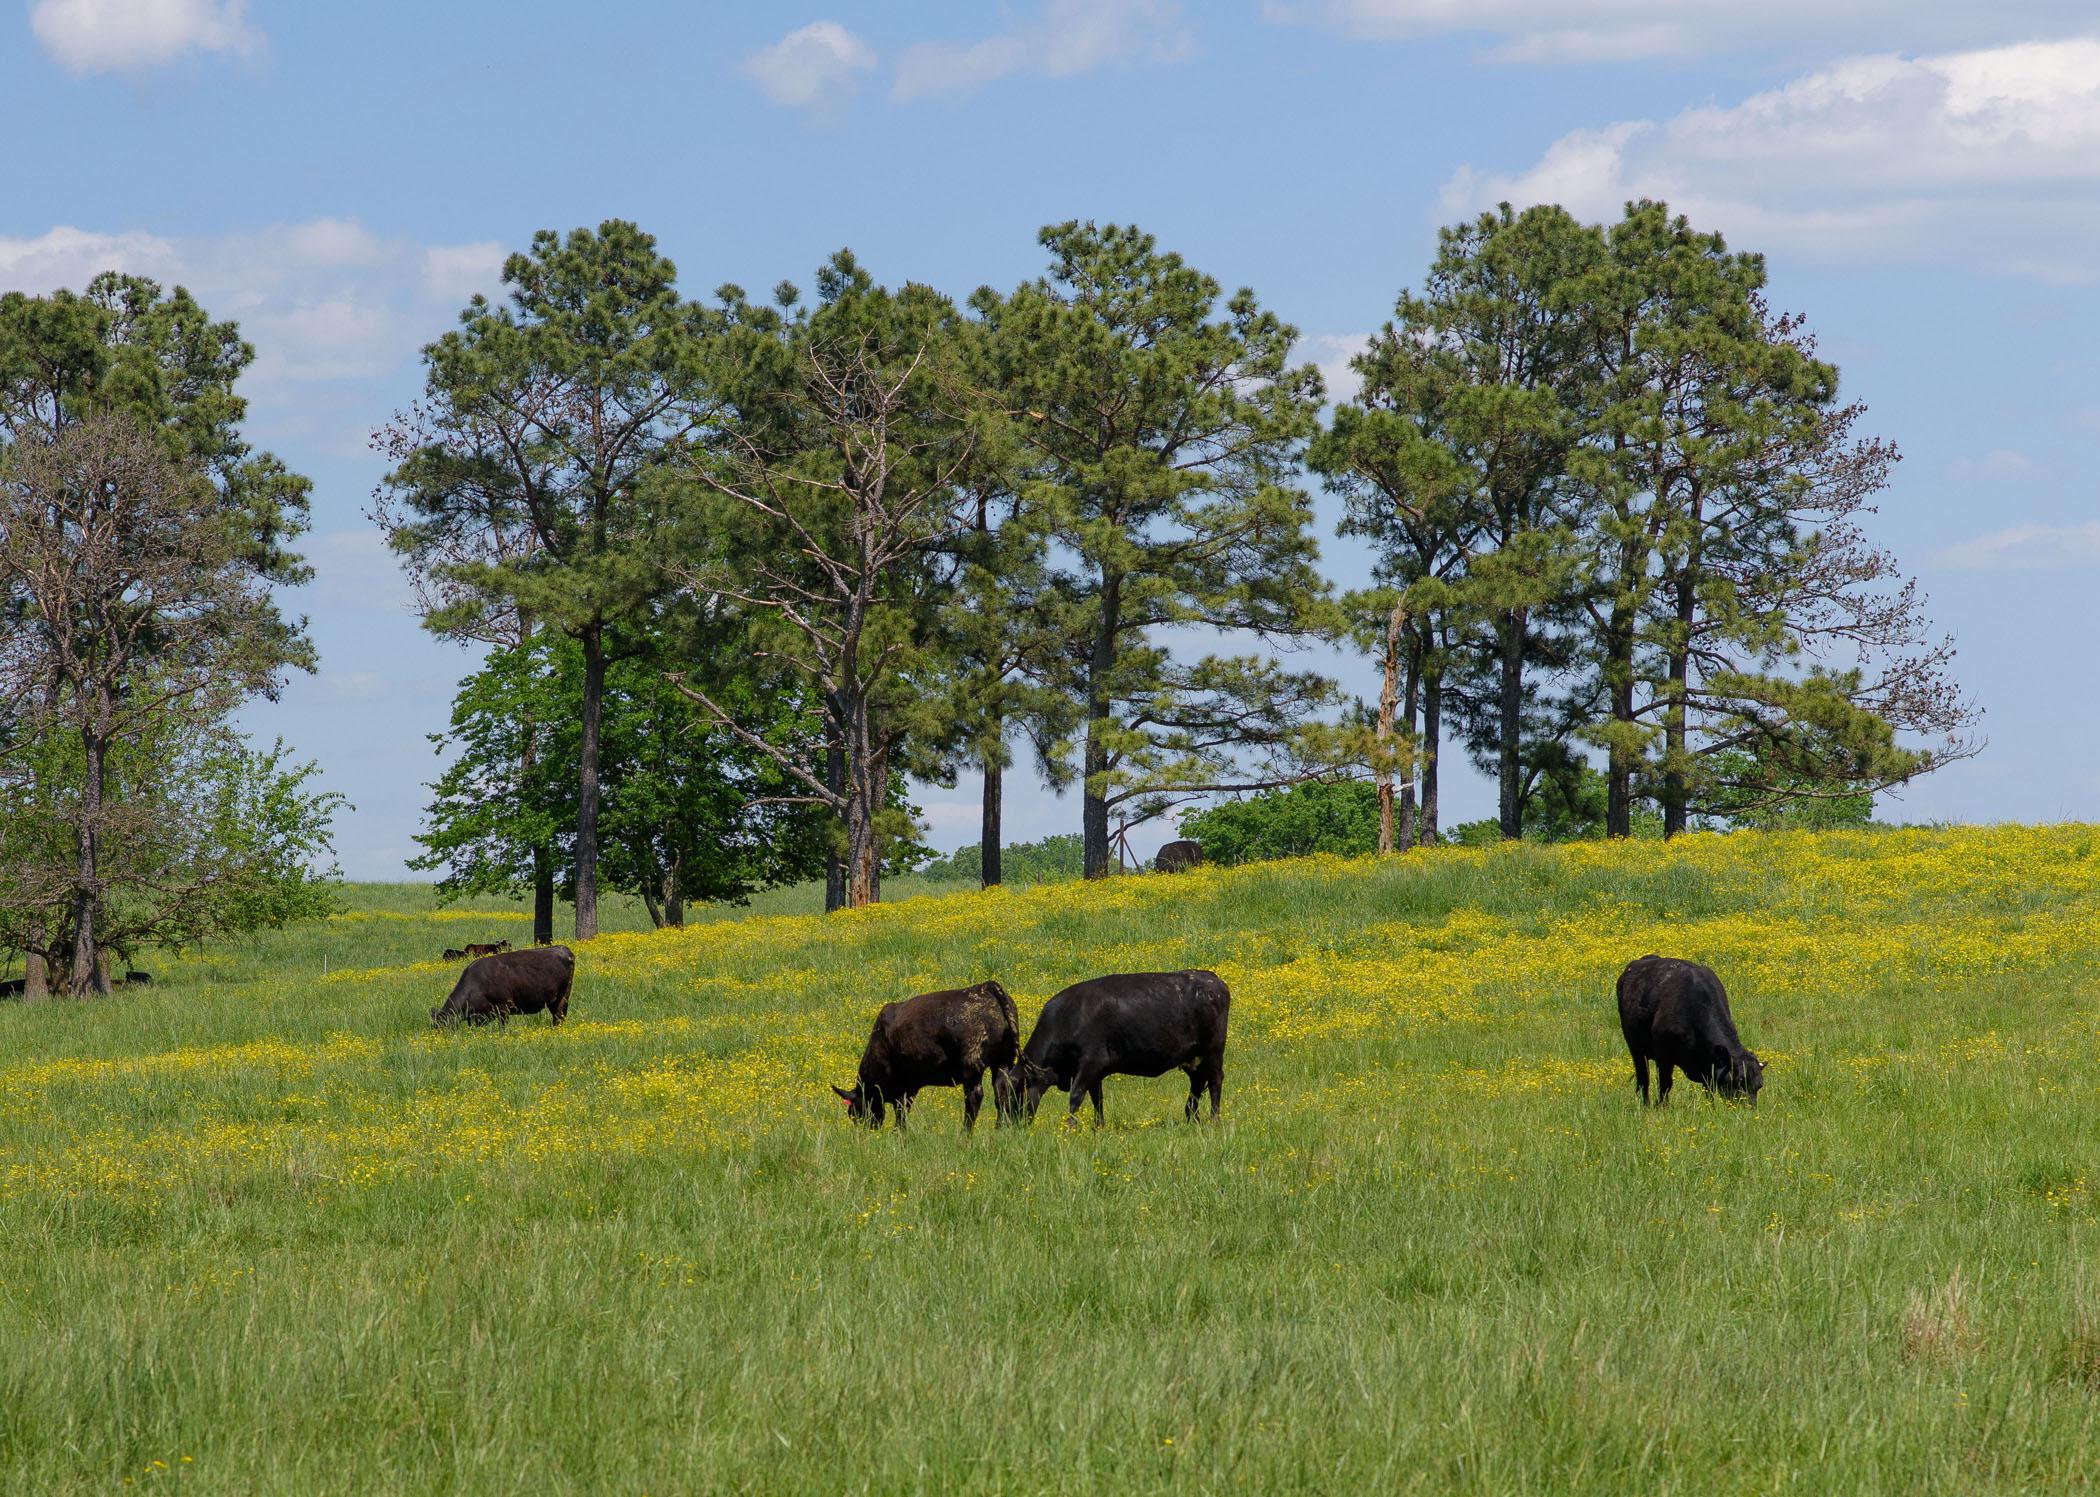 A field with four black cows.